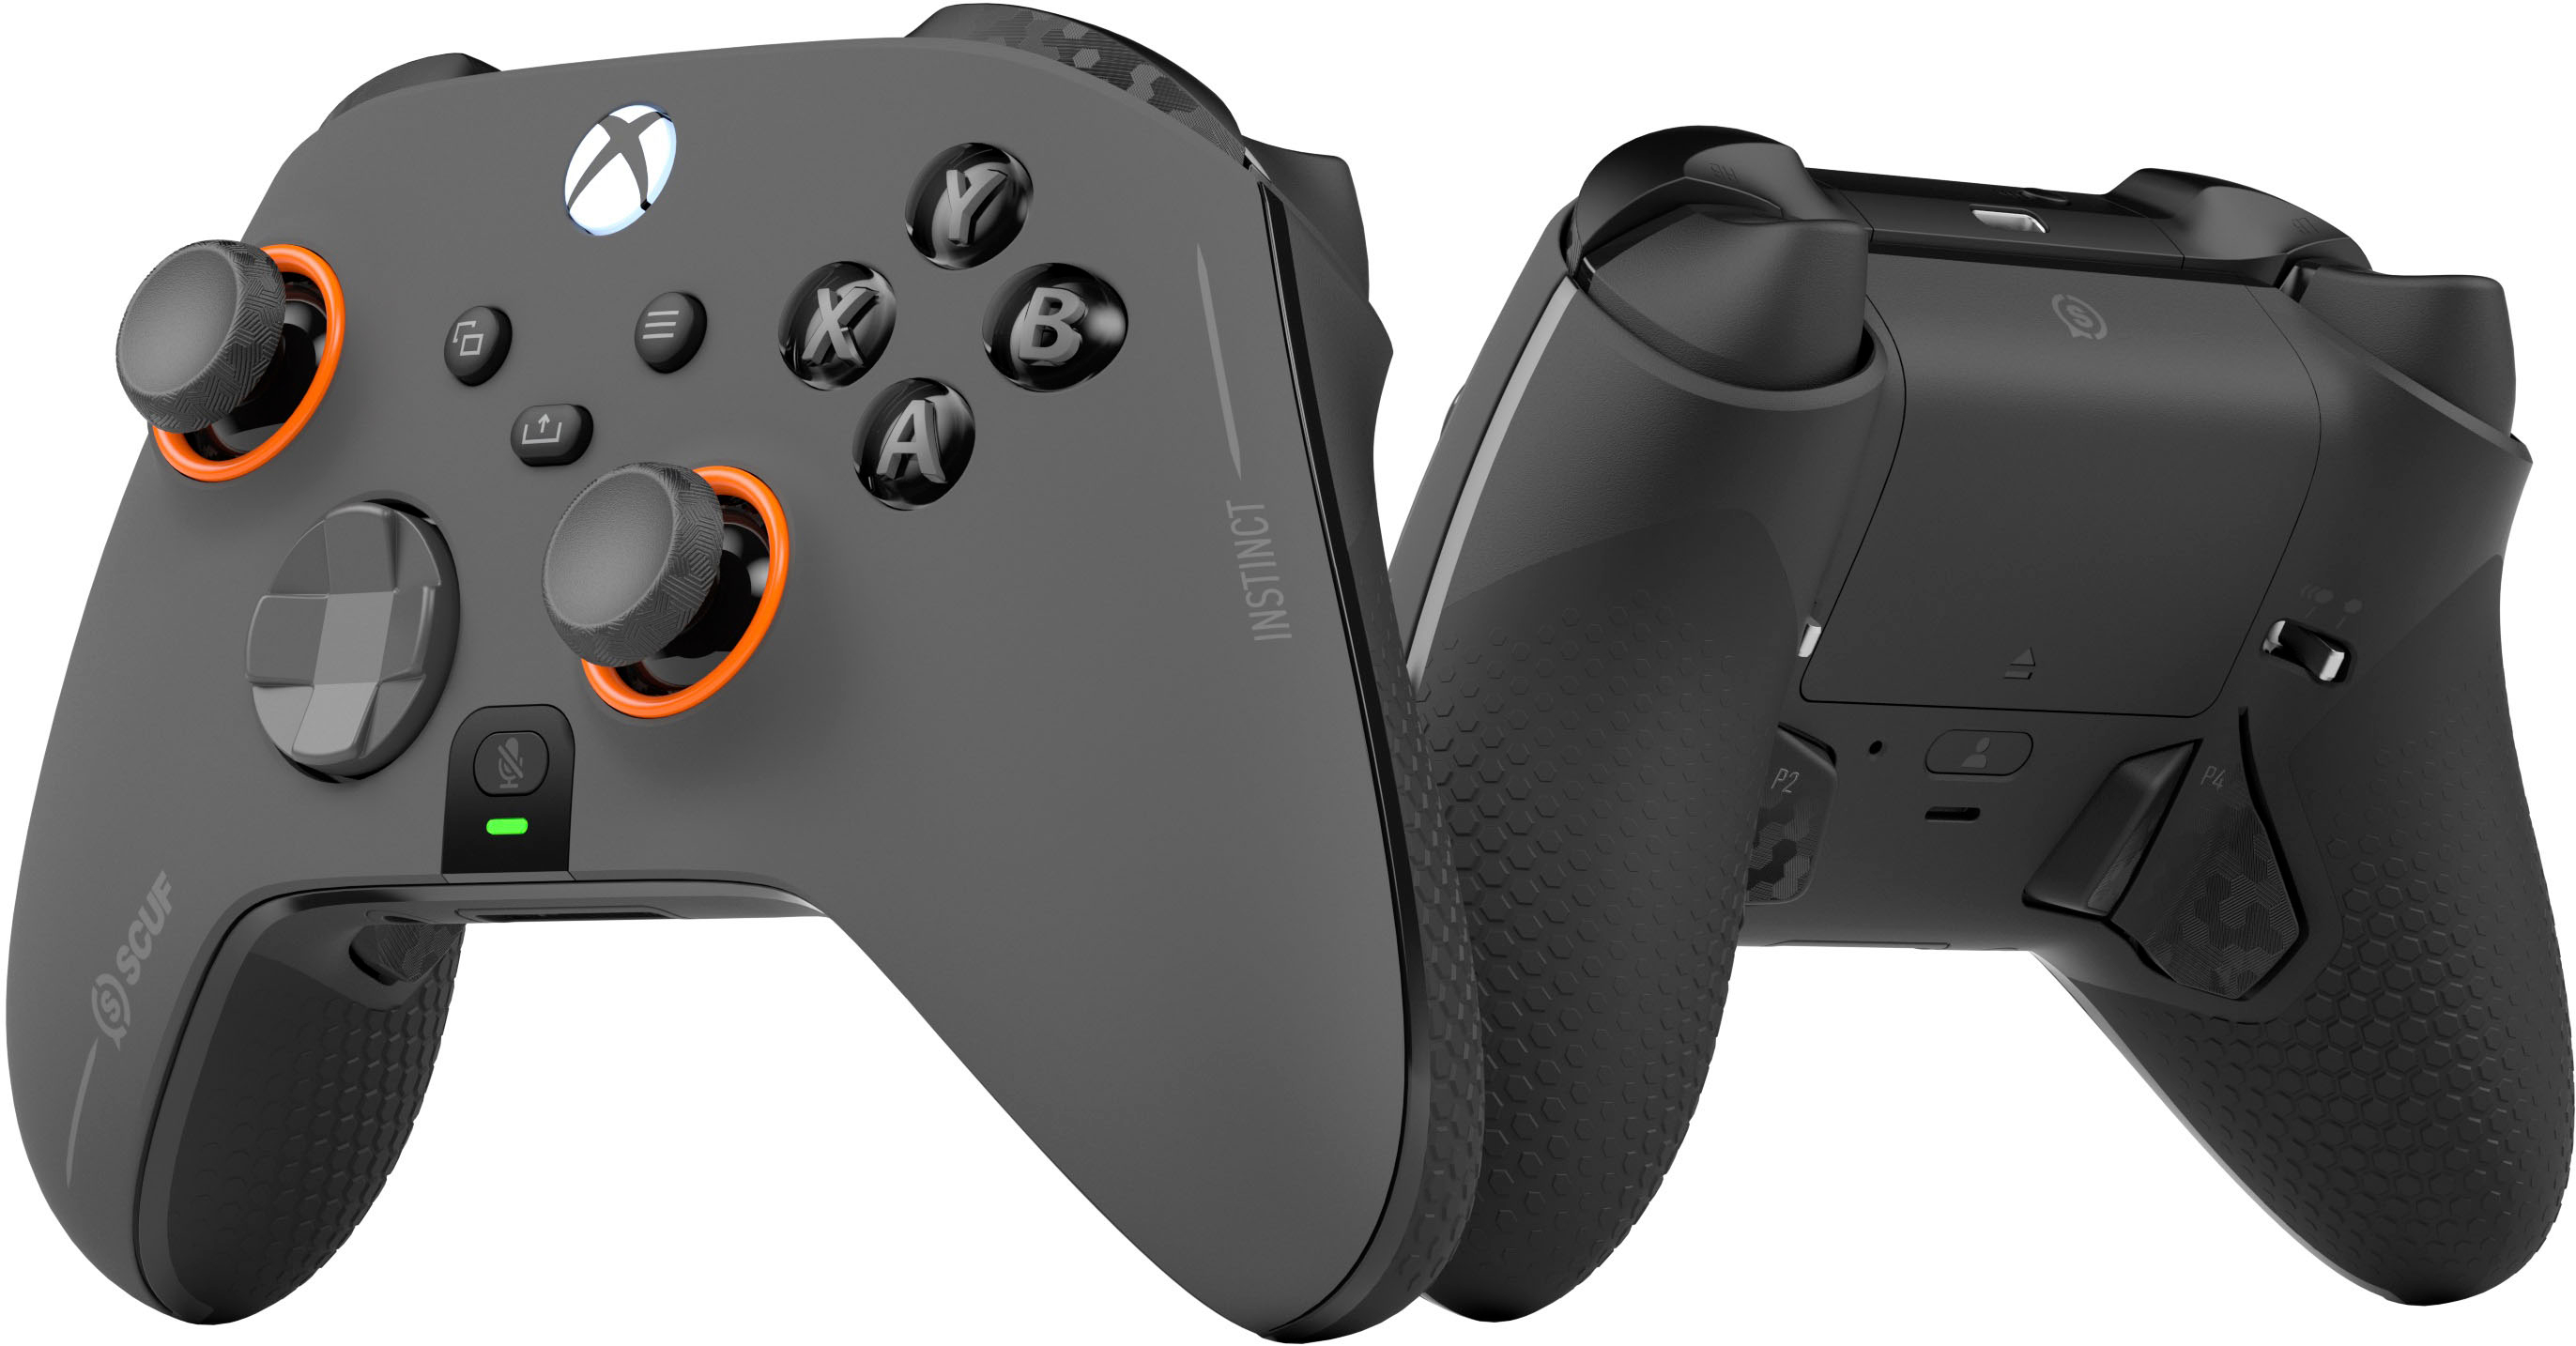 Scuf Releases First Wireless Performance Controller for Xbox